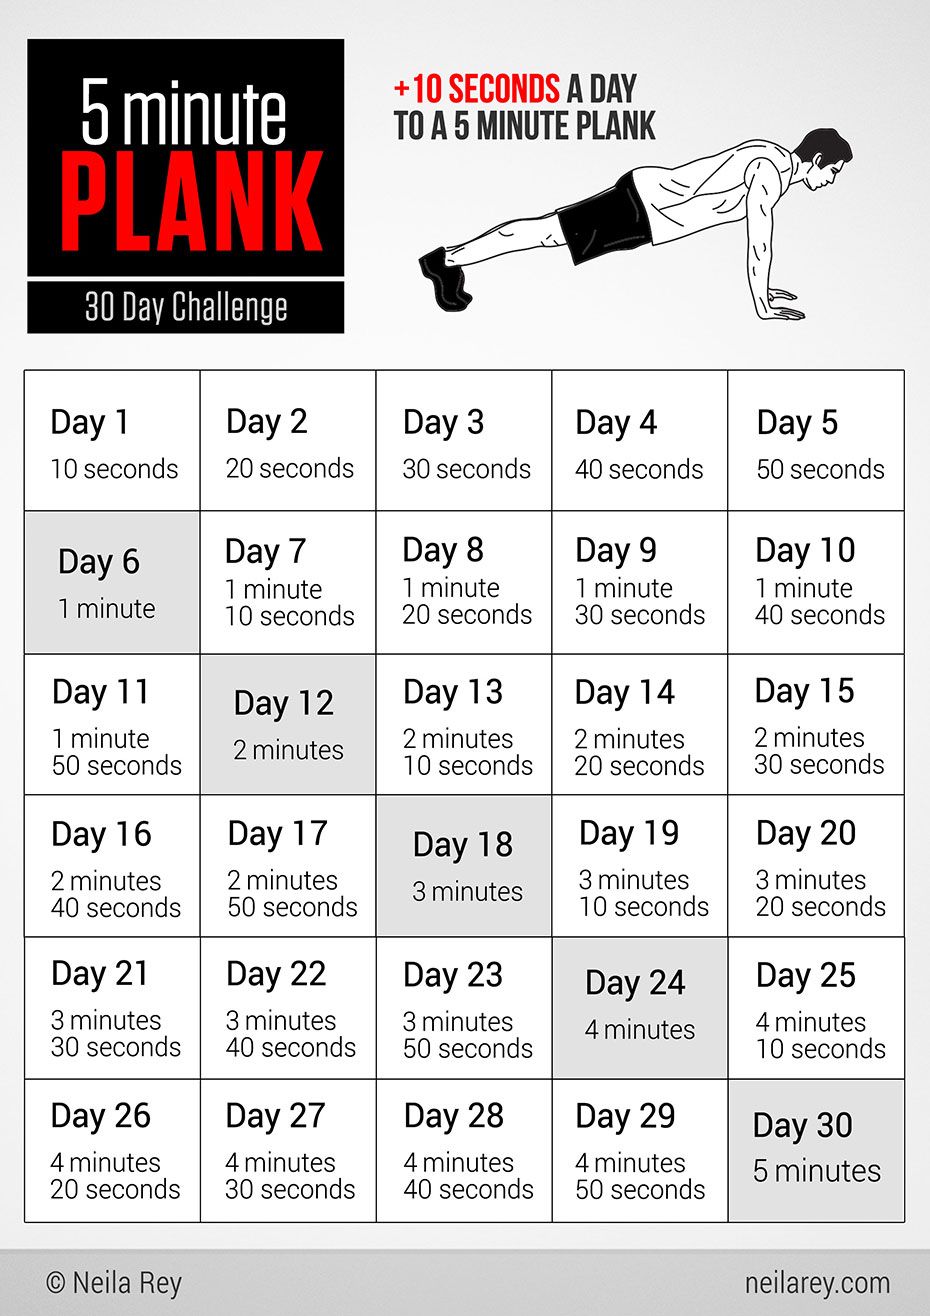 30 day plank challenge printable in word 91